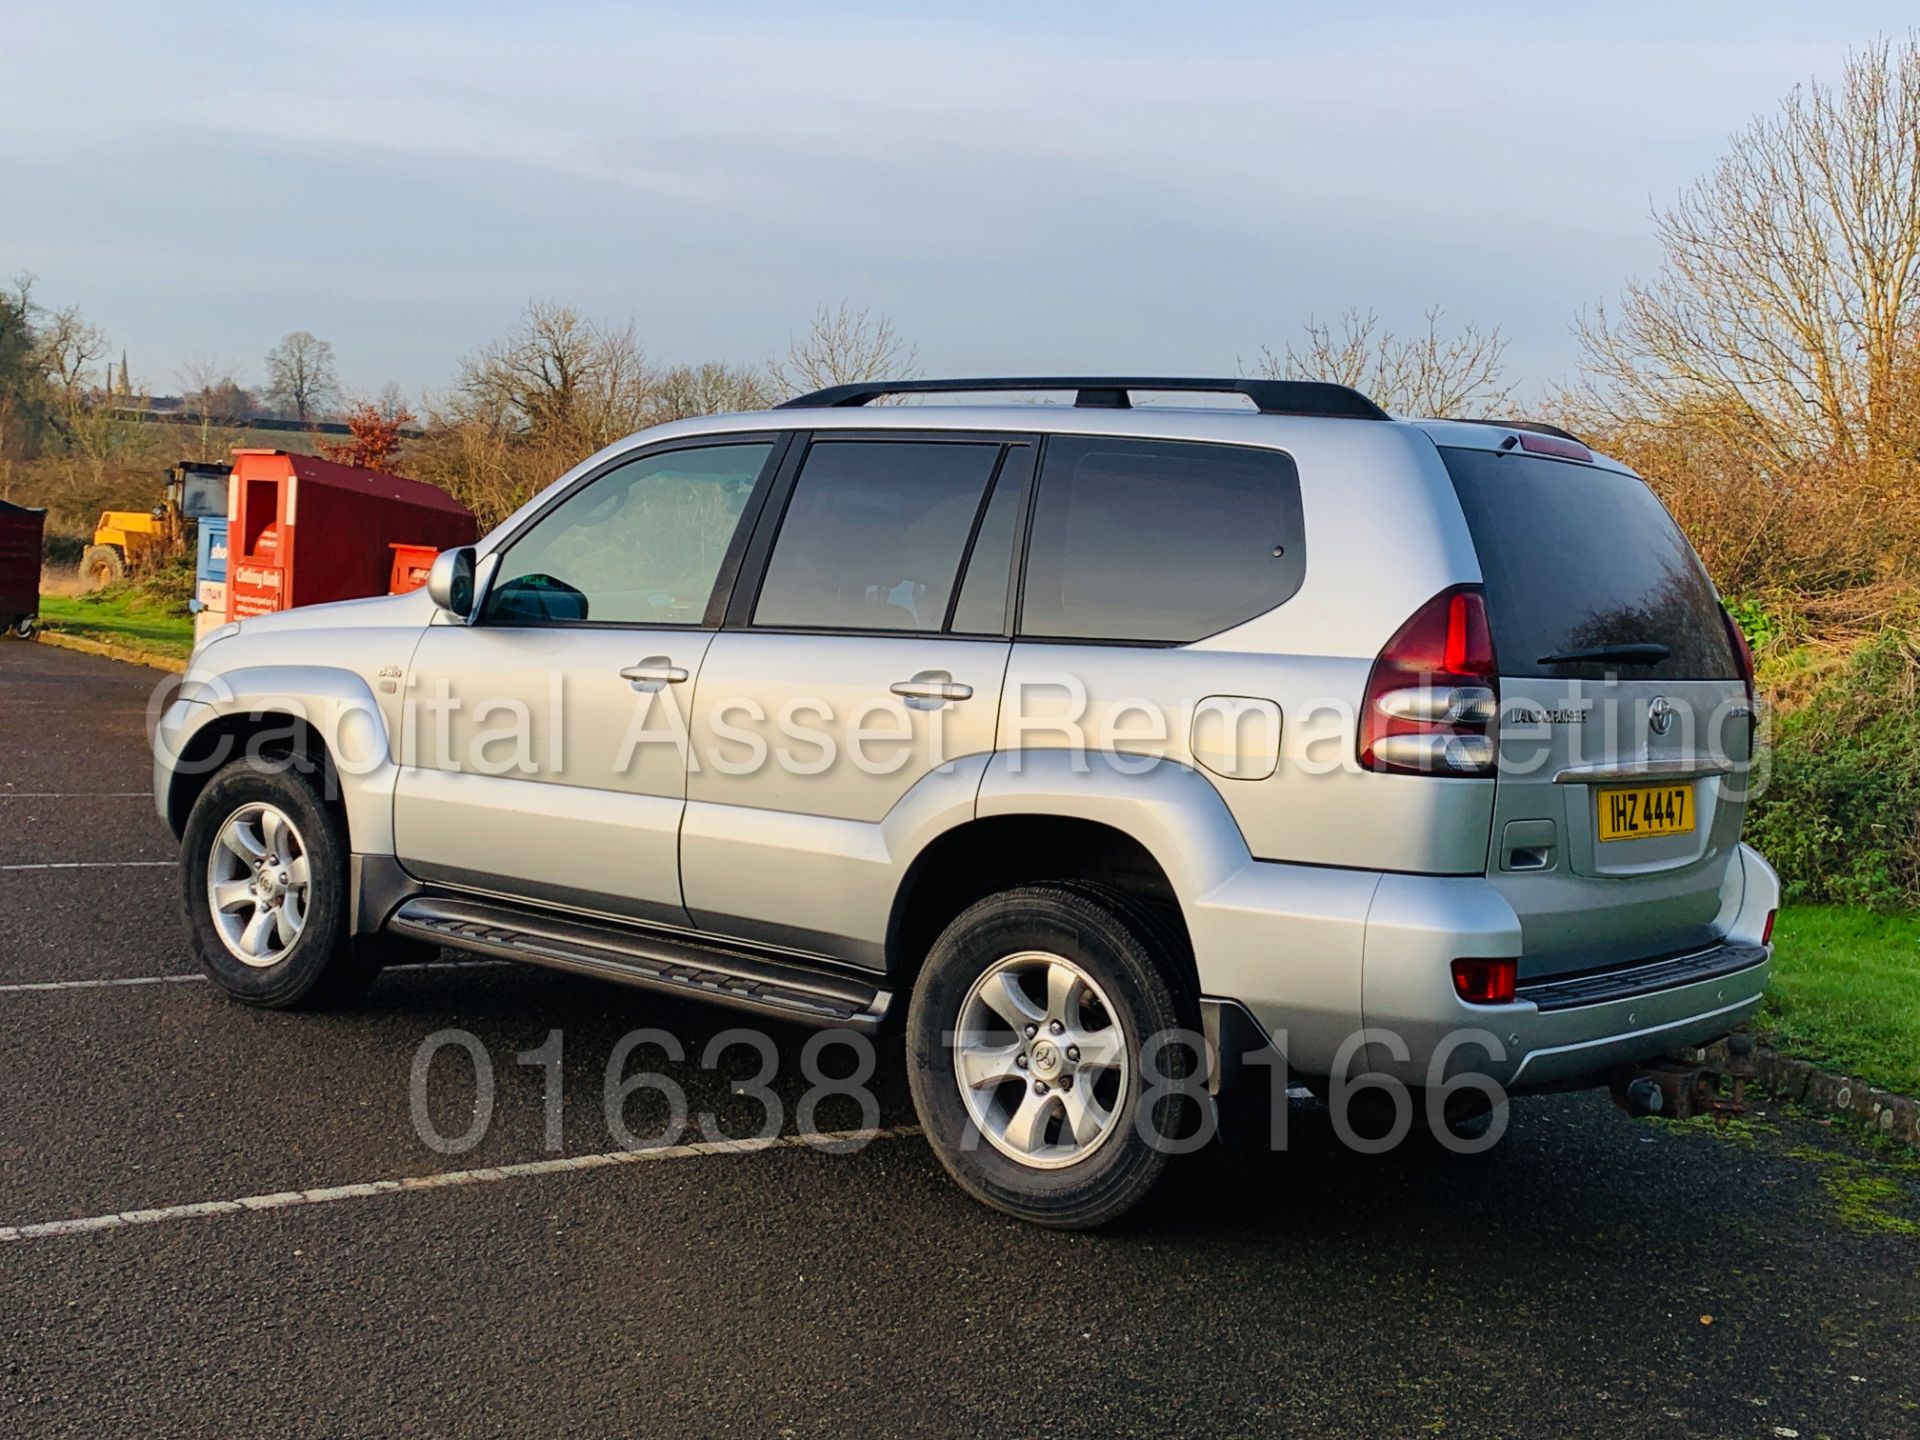 (On Sale) TOYOTA LAND CRUISER *INVINCIBLE* 7 SEATER SUV (2006) '3.0 D-4D - AUTO' *TOP SPEC* (NO VAT) - Image 8 of 50